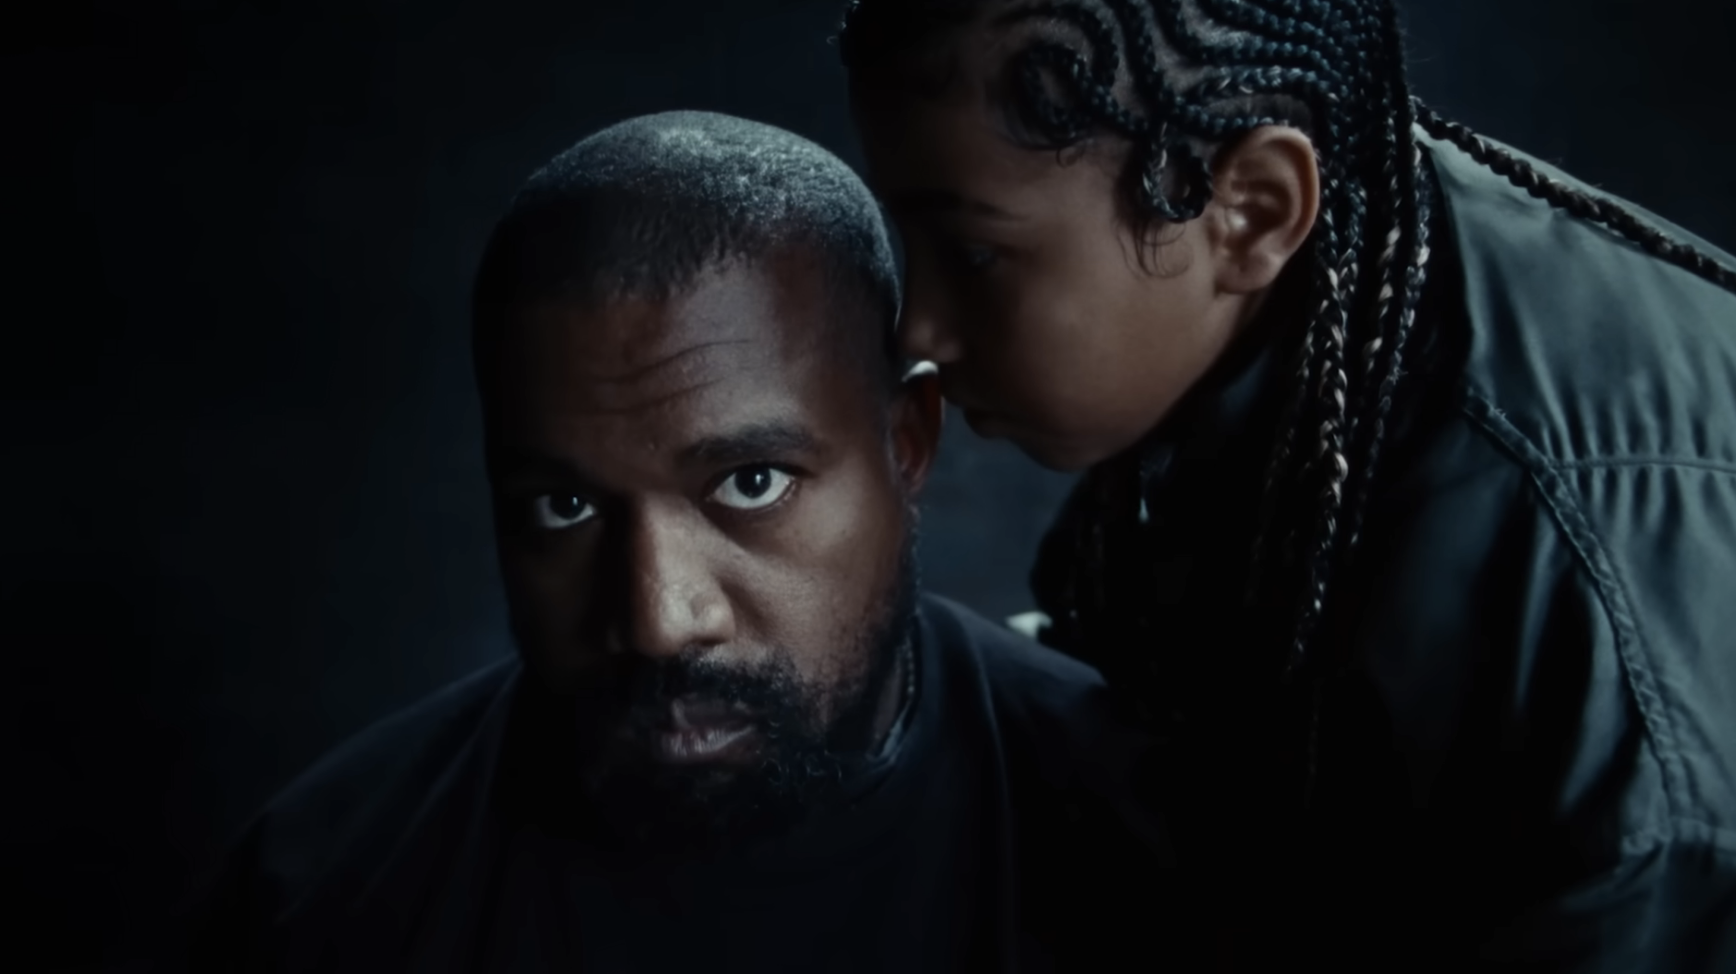 Kanye West and daughter, close up, serious expressions, dark backdrop